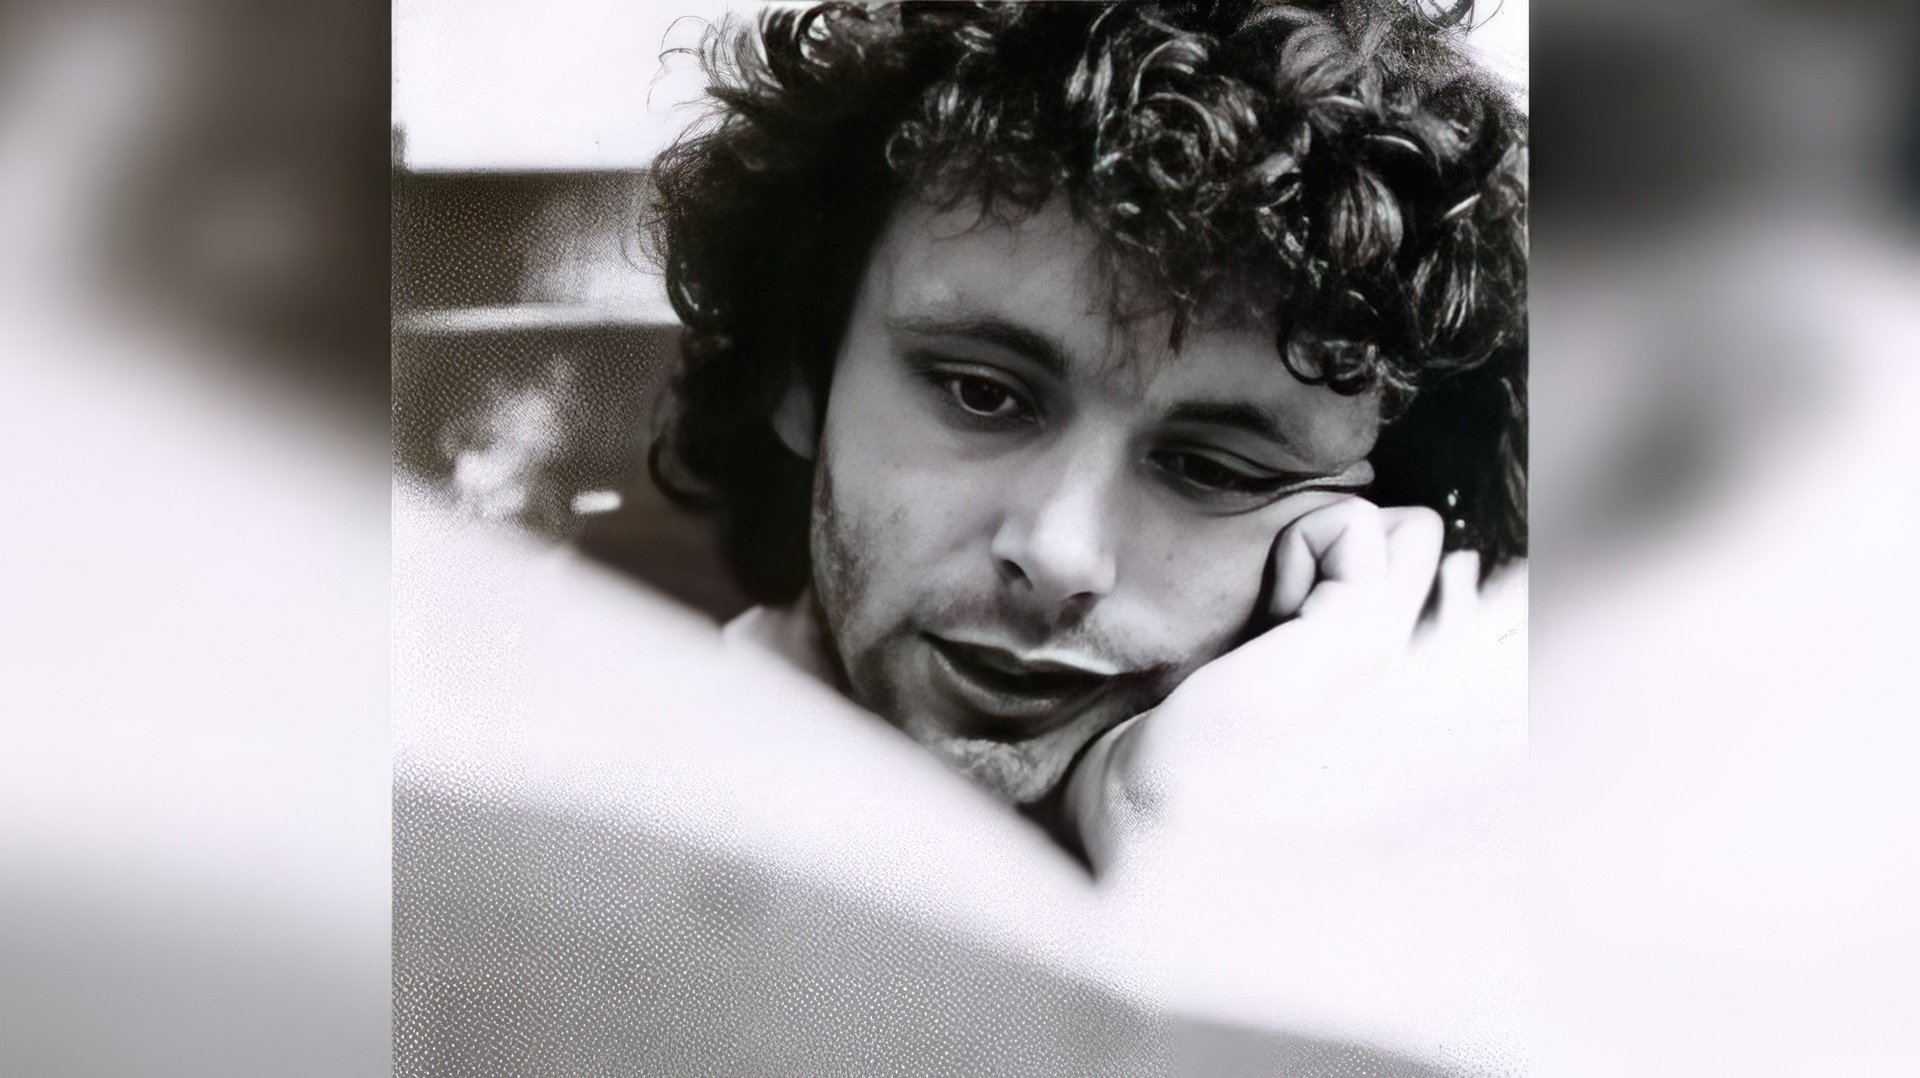 Michael Sheen in his youth